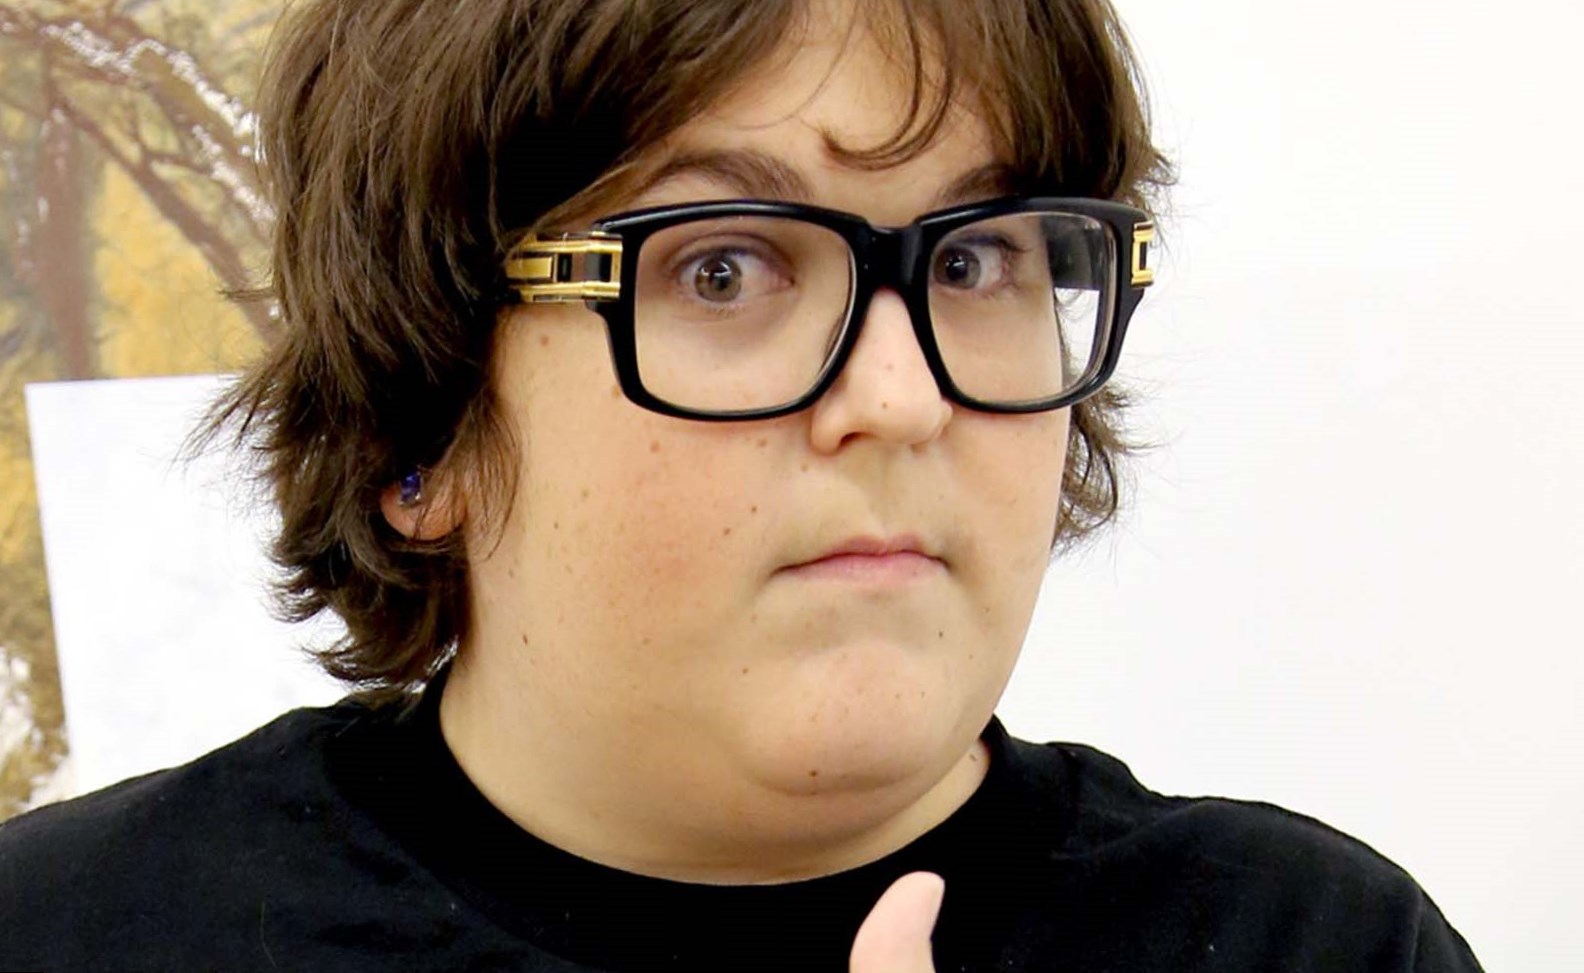 What is Andy Milonakis real name?